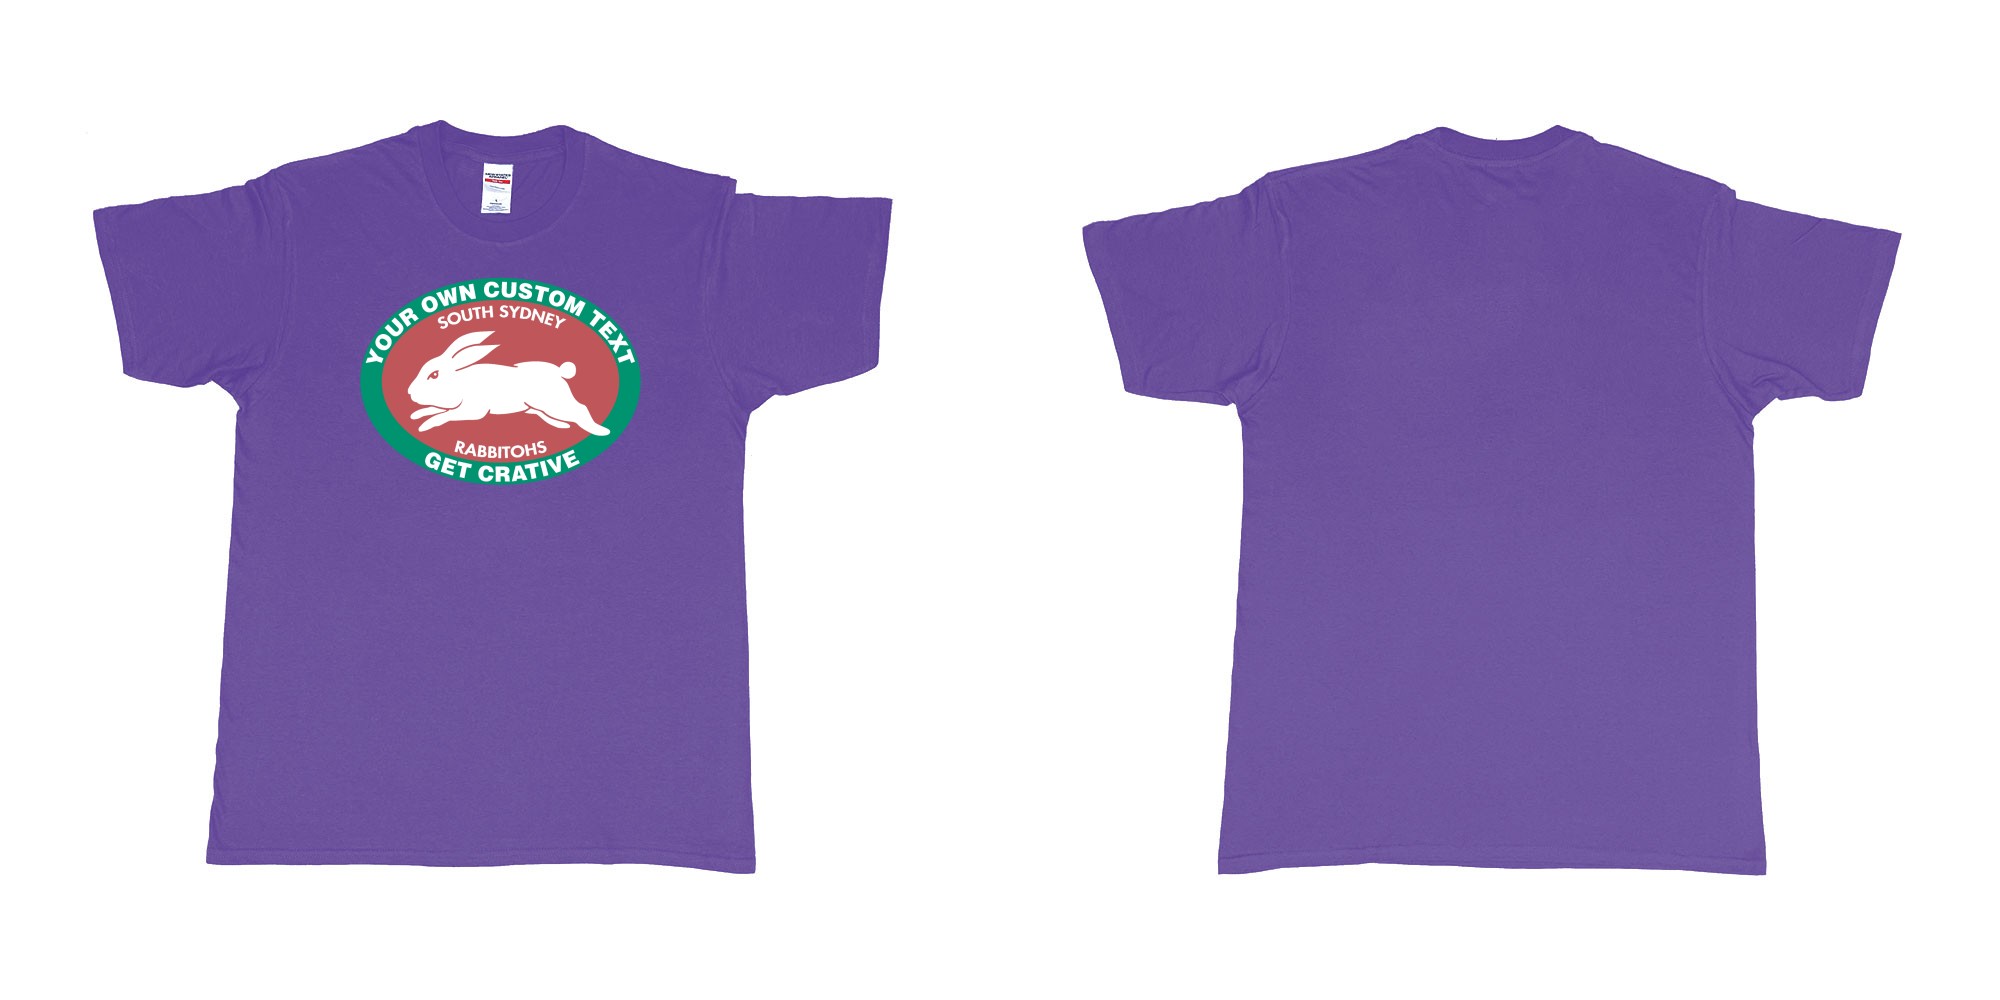 Custom tshirt design south sydney rabbitohs nrl custom print in fabric color purple choice your own text made in Bali by The Pirate Way